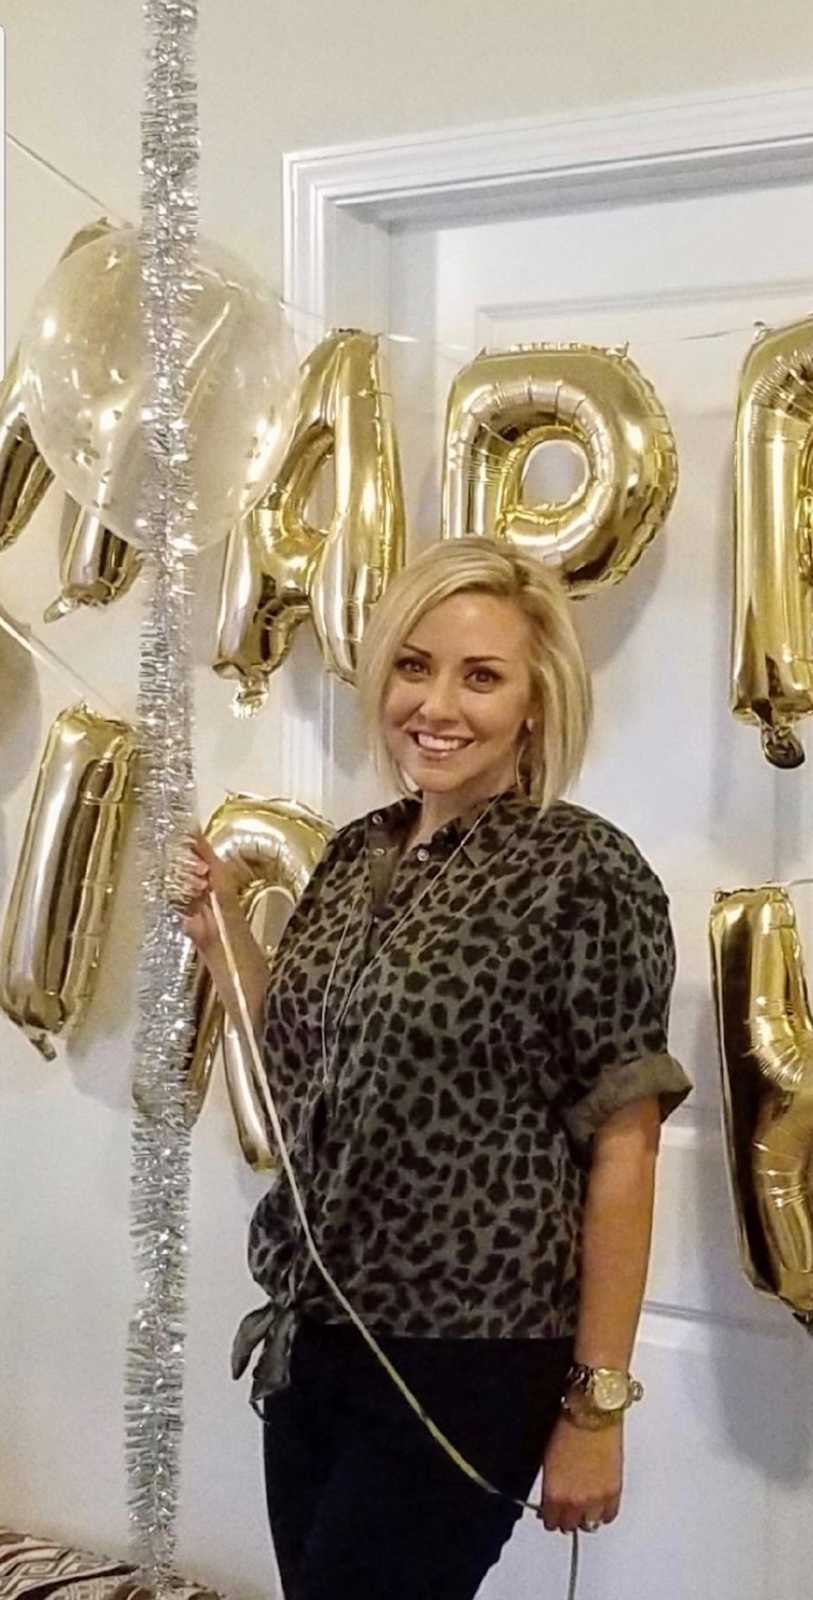 Woman who cut her hair smiles as she holds balloon in front of Happy Birthday sign